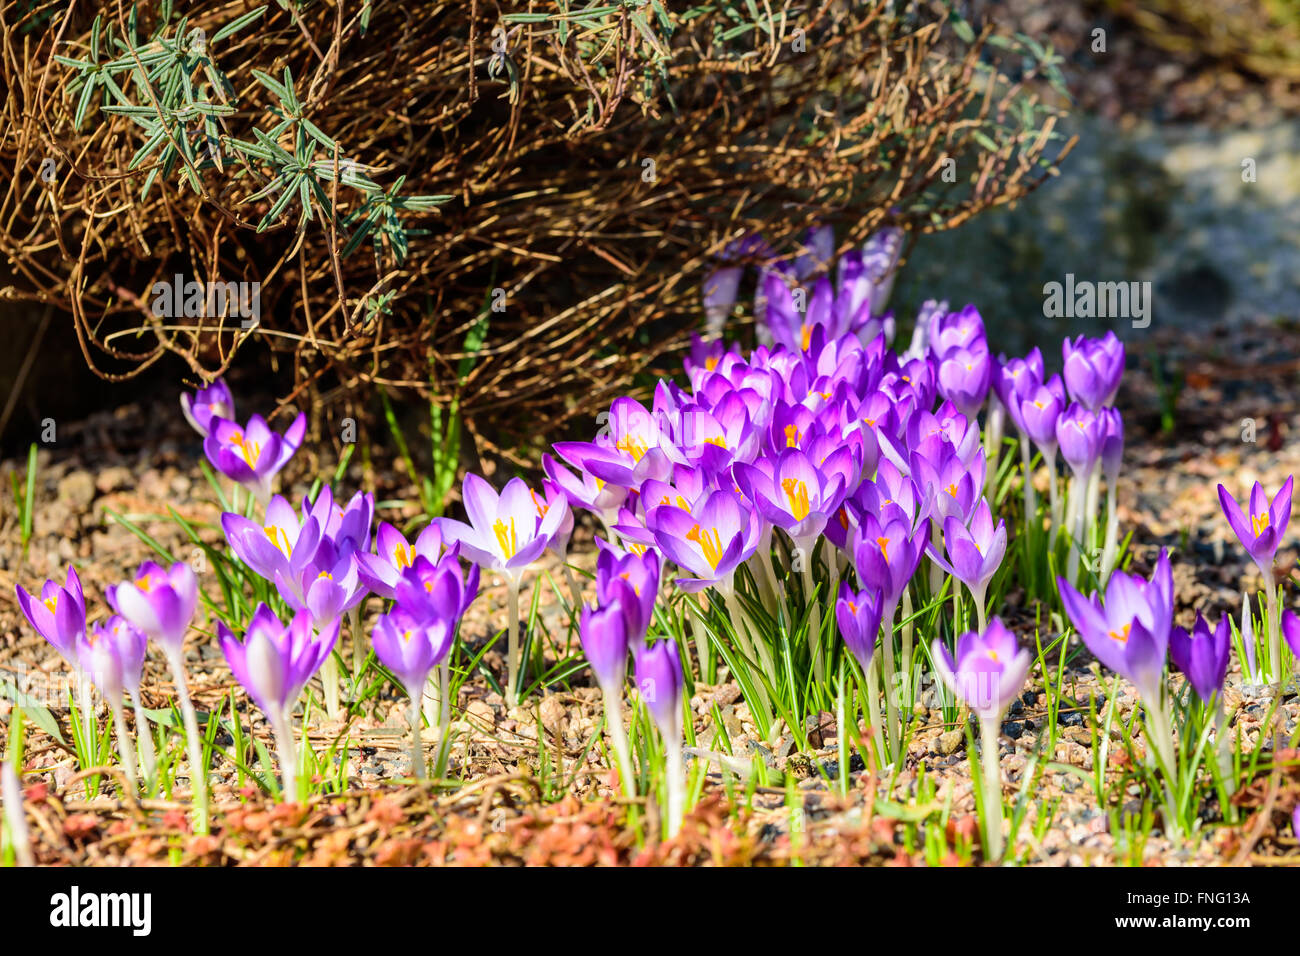 A collection of early crocus (Crocus tommasinianus) growing under a bush. Lovely purple and yellow colors. This is one of the fi Stock Photo